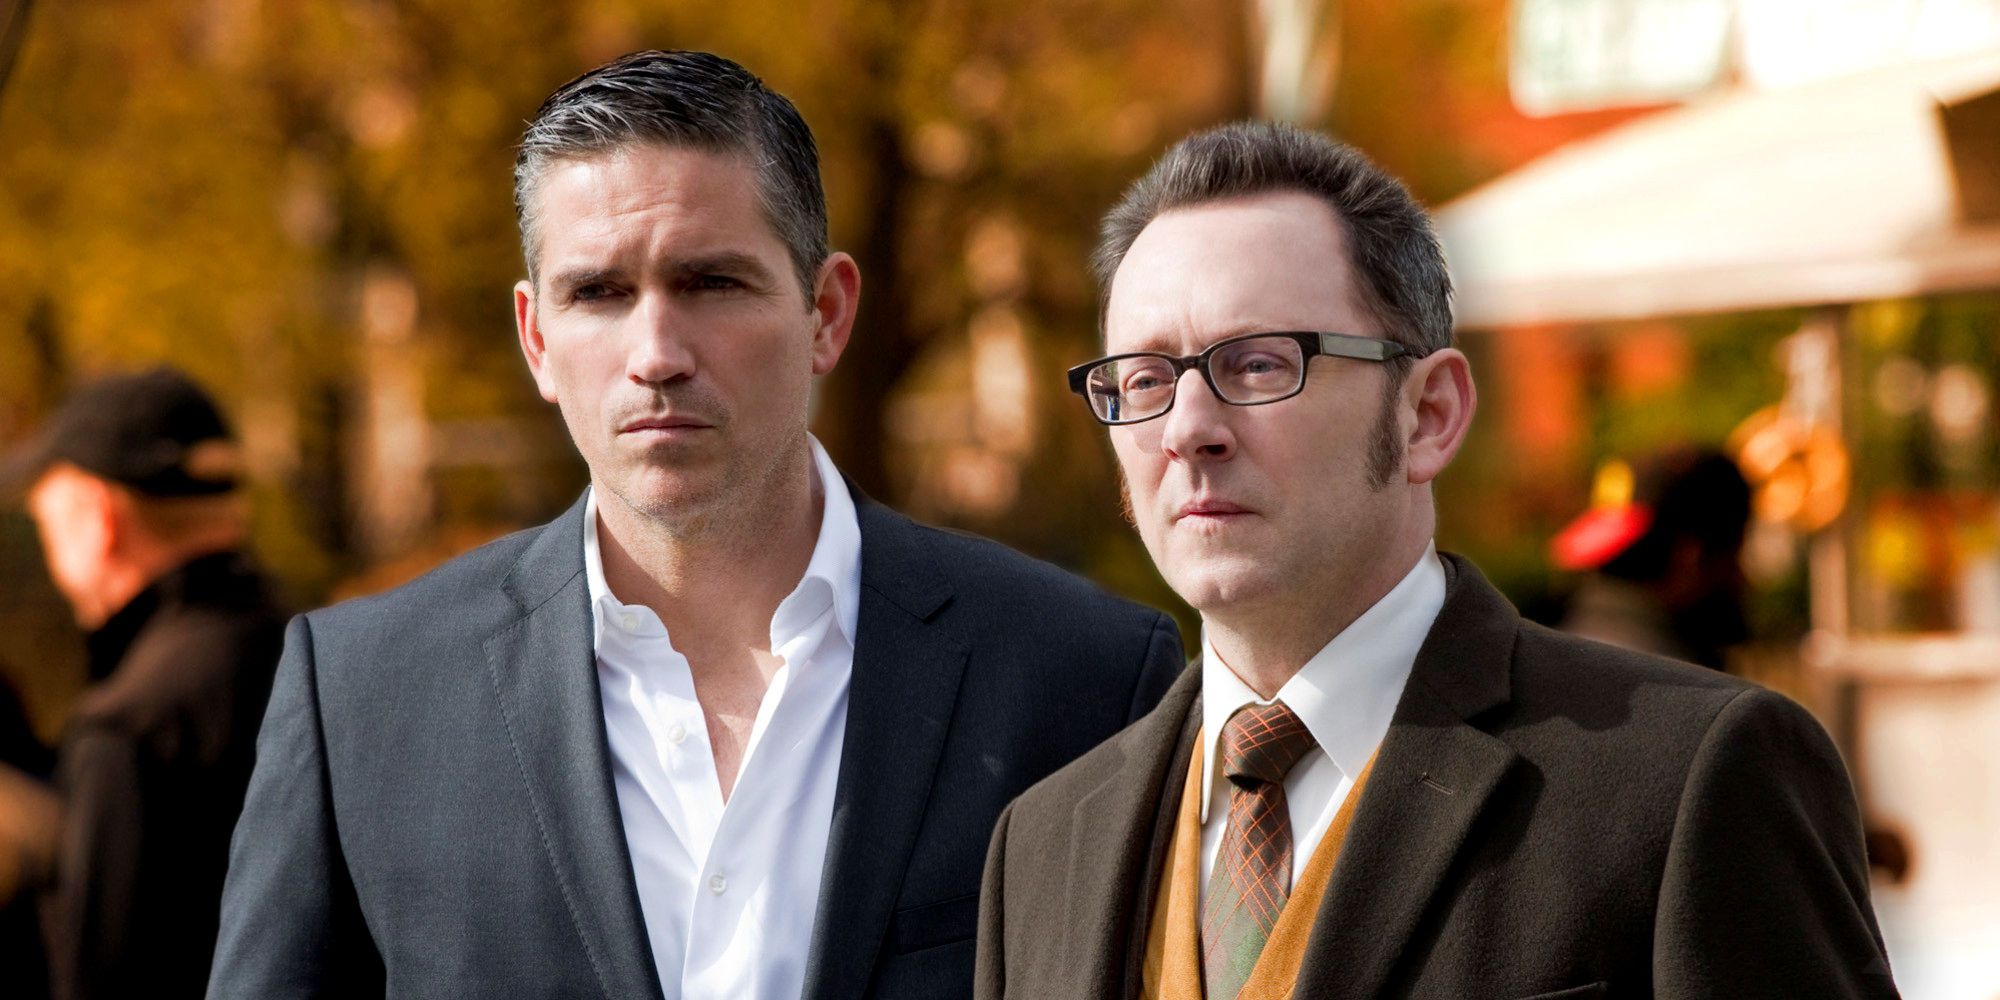 Jim Caviezel and Michael Emerson in suits in Person of Interest